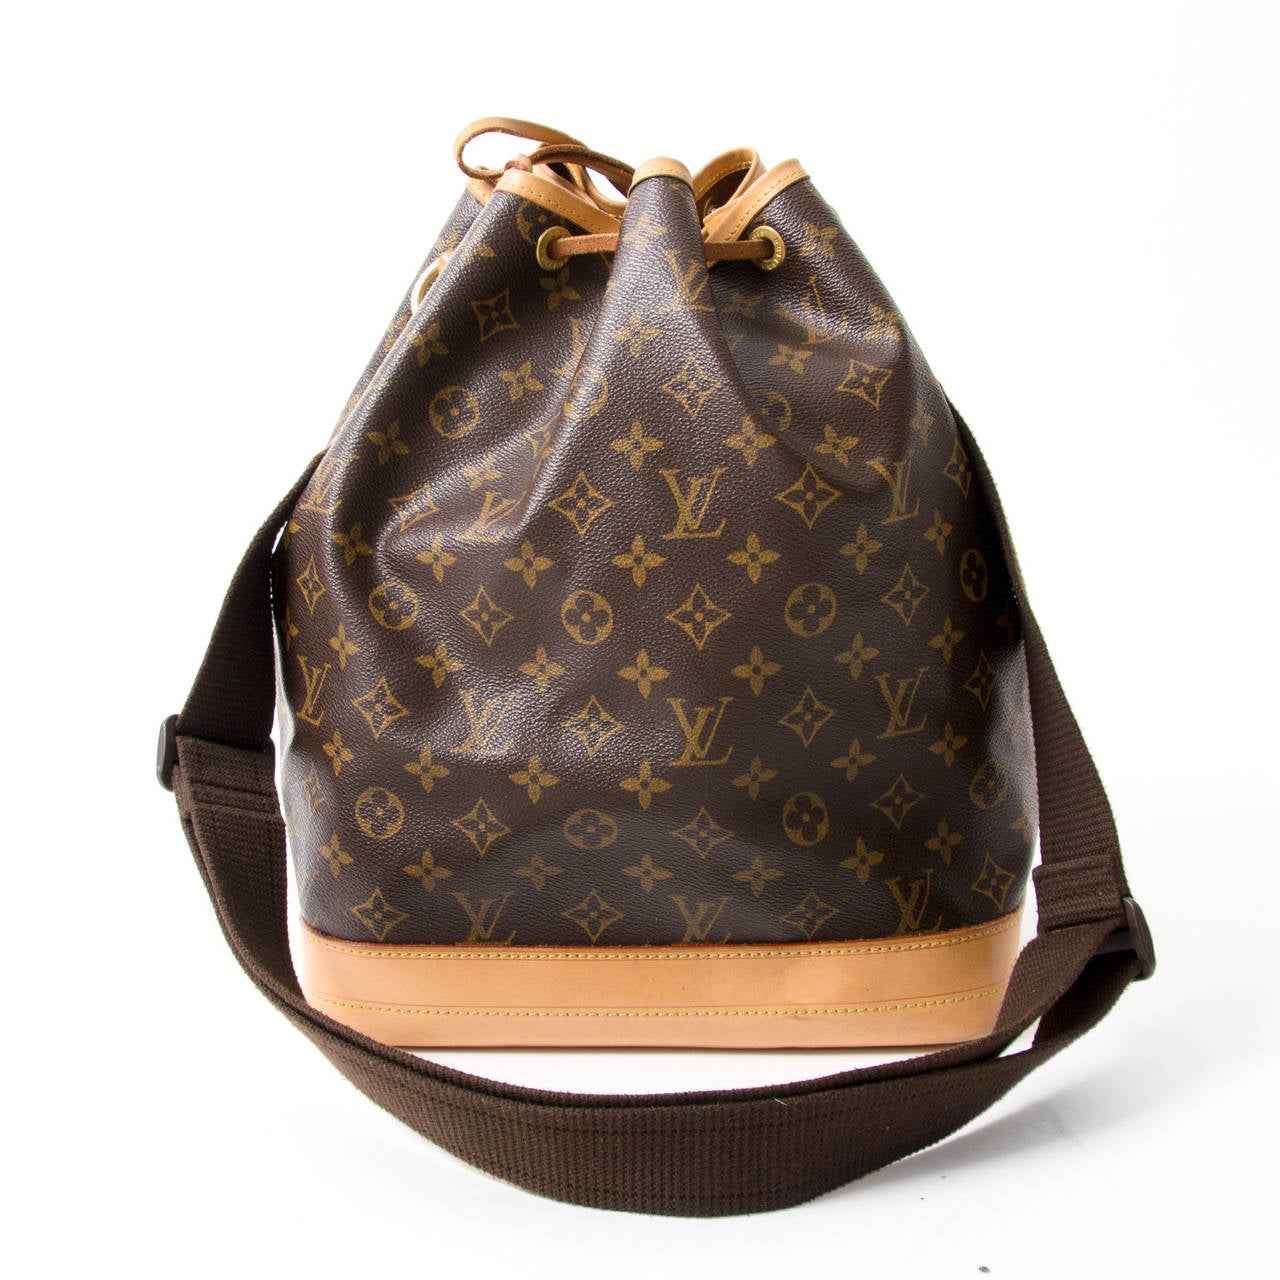 Asked by a Champagne producer to develop a sturdy, stylish bag in which he could transport five bottles of bubbly, Gaston-Louis Vuitton created the classic Noé design. That was in 1932. Shown here in signature Monogram canvas. 

- Signature